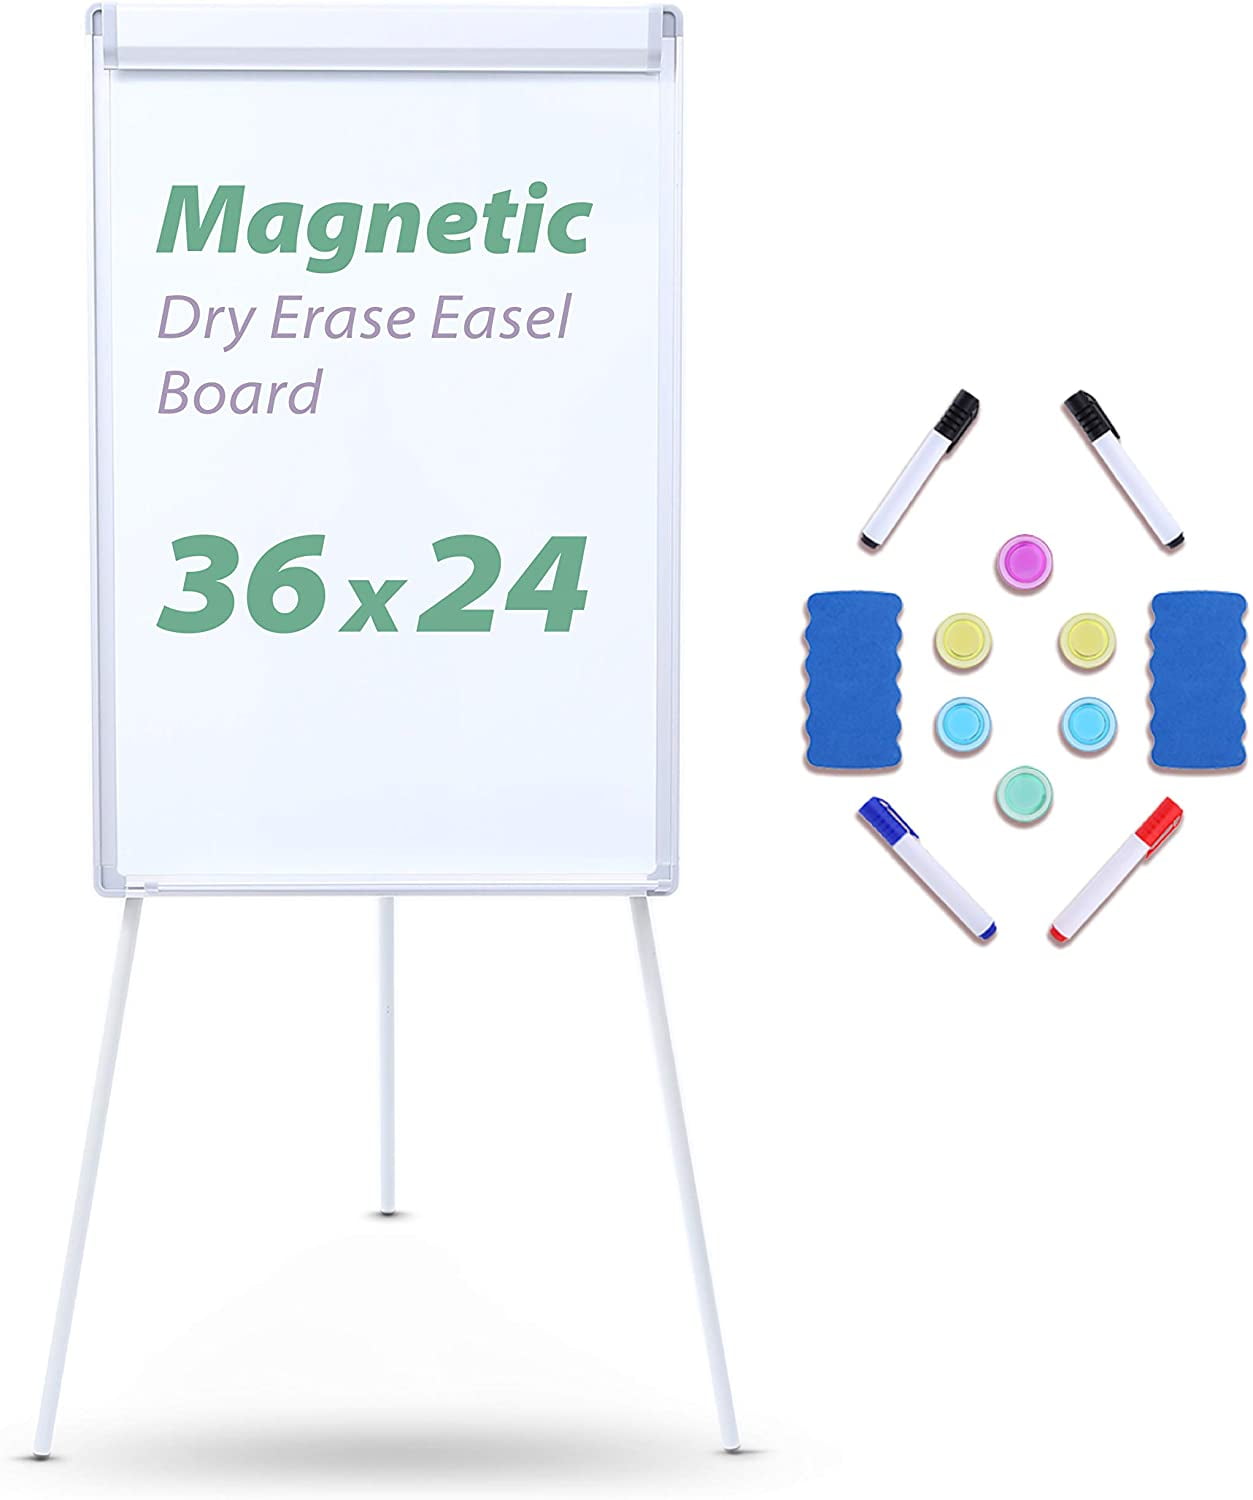 Magnetic White Board 36 x 24 Inches Flipchart Easel Dry Erase Board 3 Markers 6 Magnets Height Adjustable Tripod Whiteboard with 1 Eraser Black Easel Whiteboard 